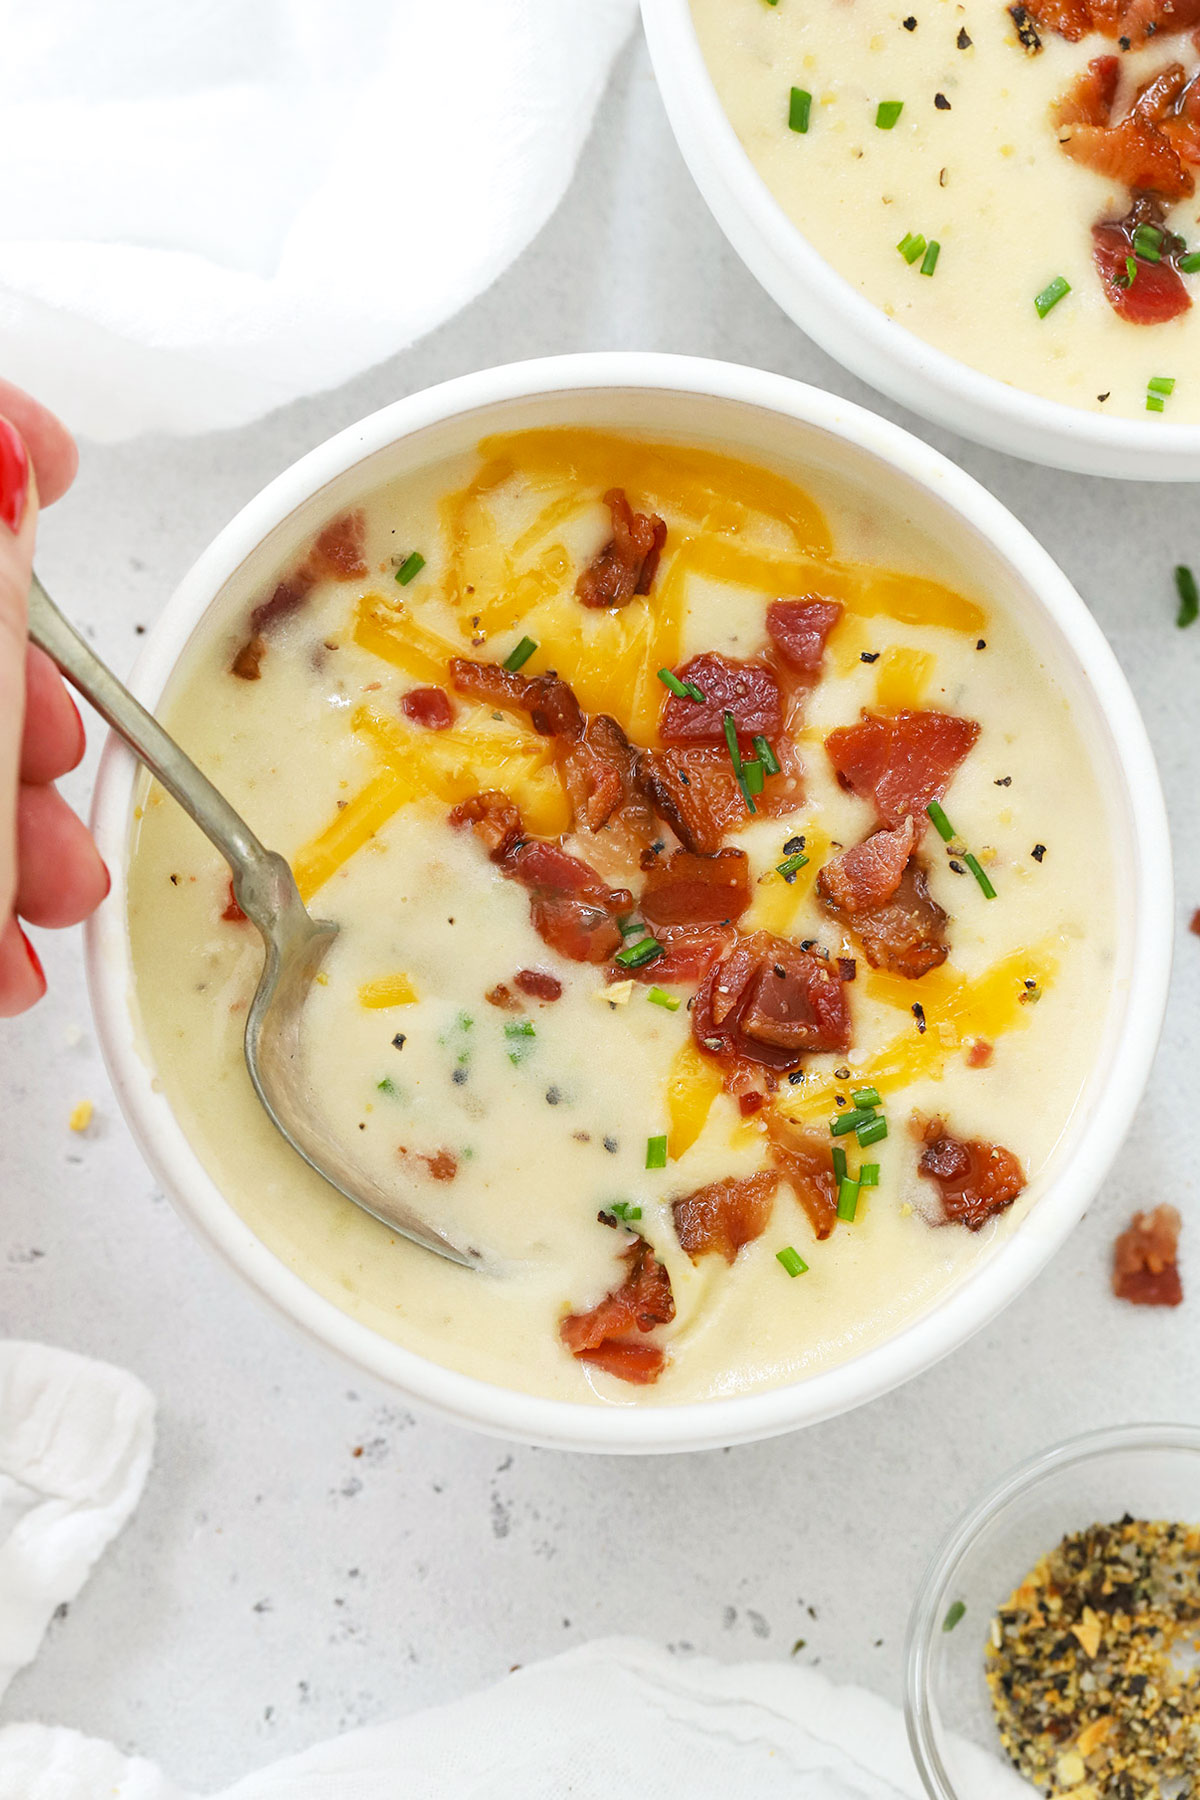 Spooning up a bite of gluten-free potato soup